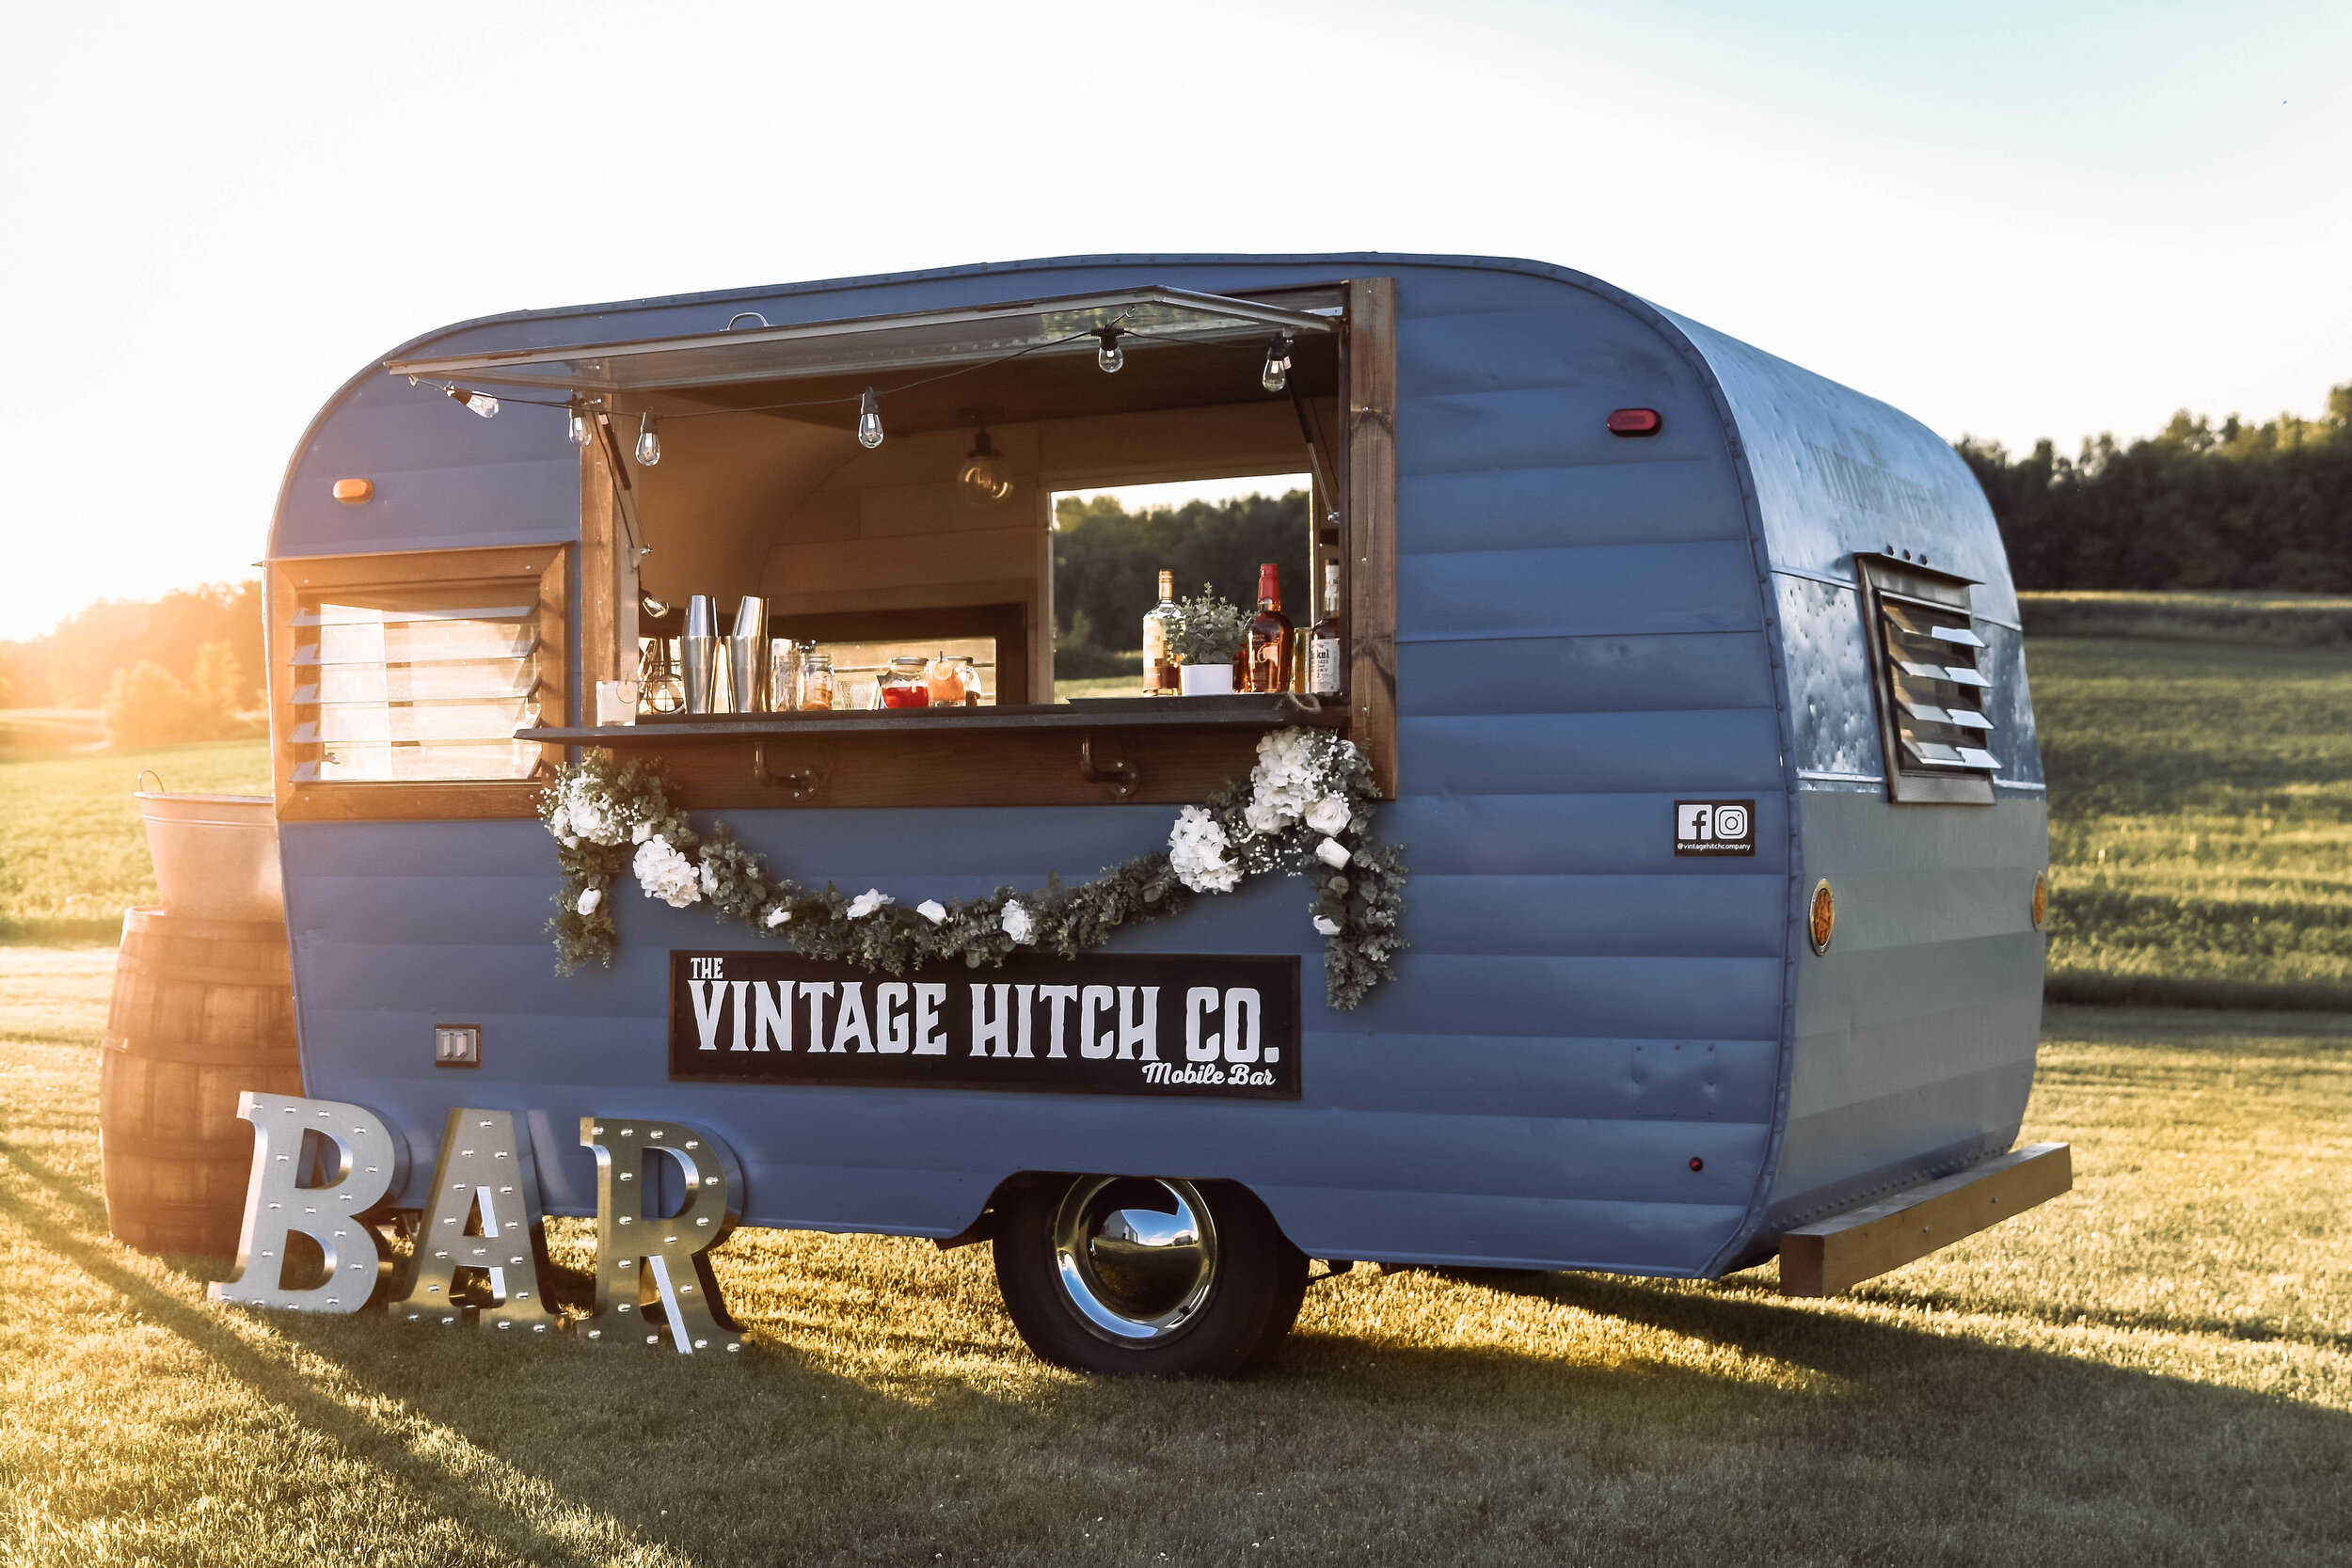 the vintage hitch co.